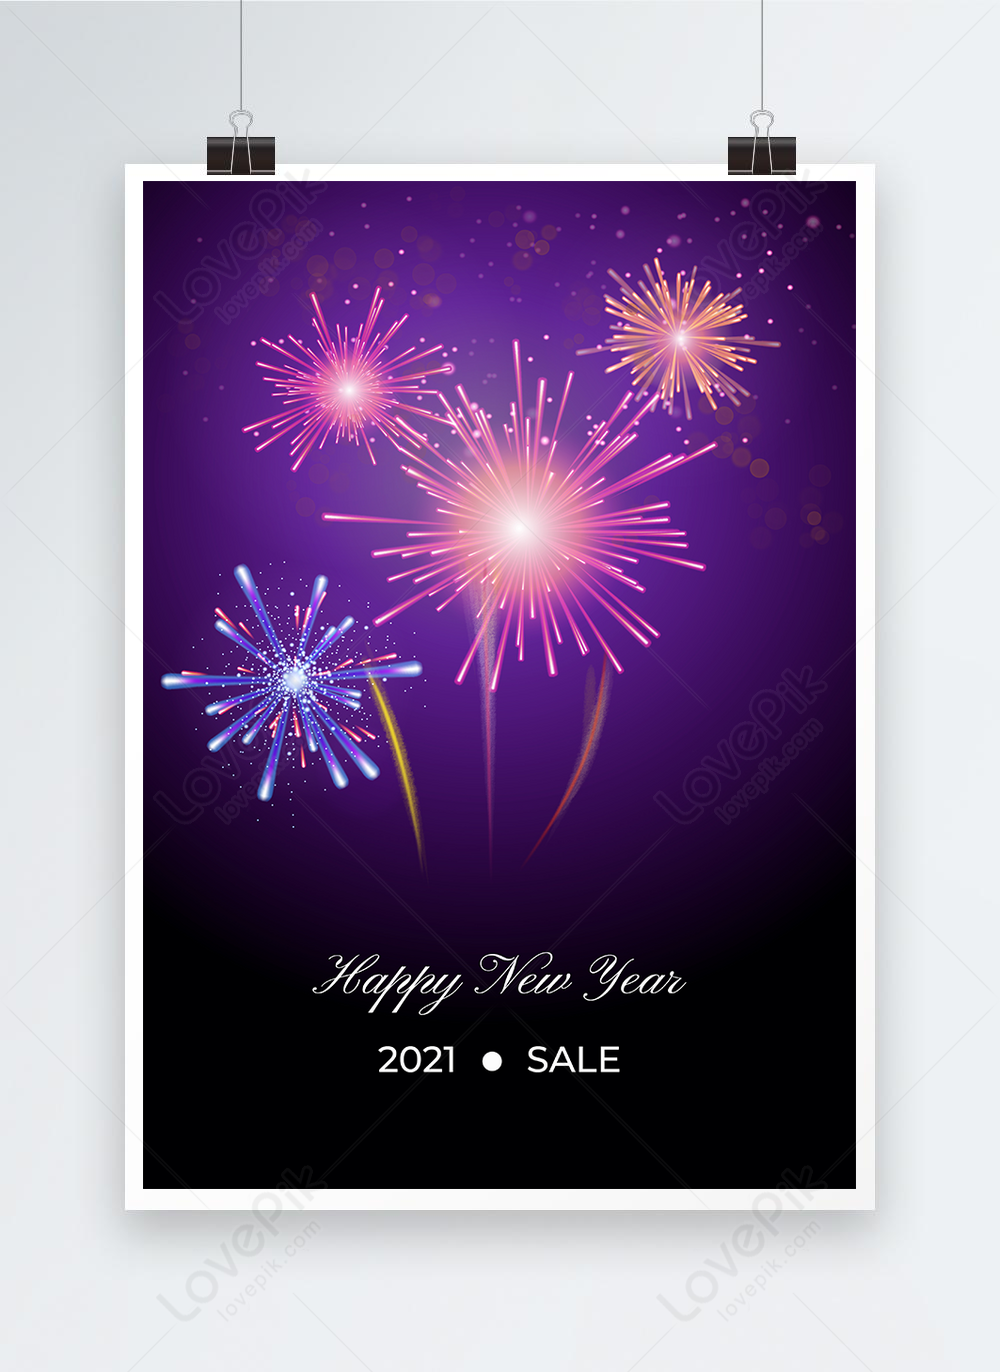 Fireworks black new year background template image_picture free download  